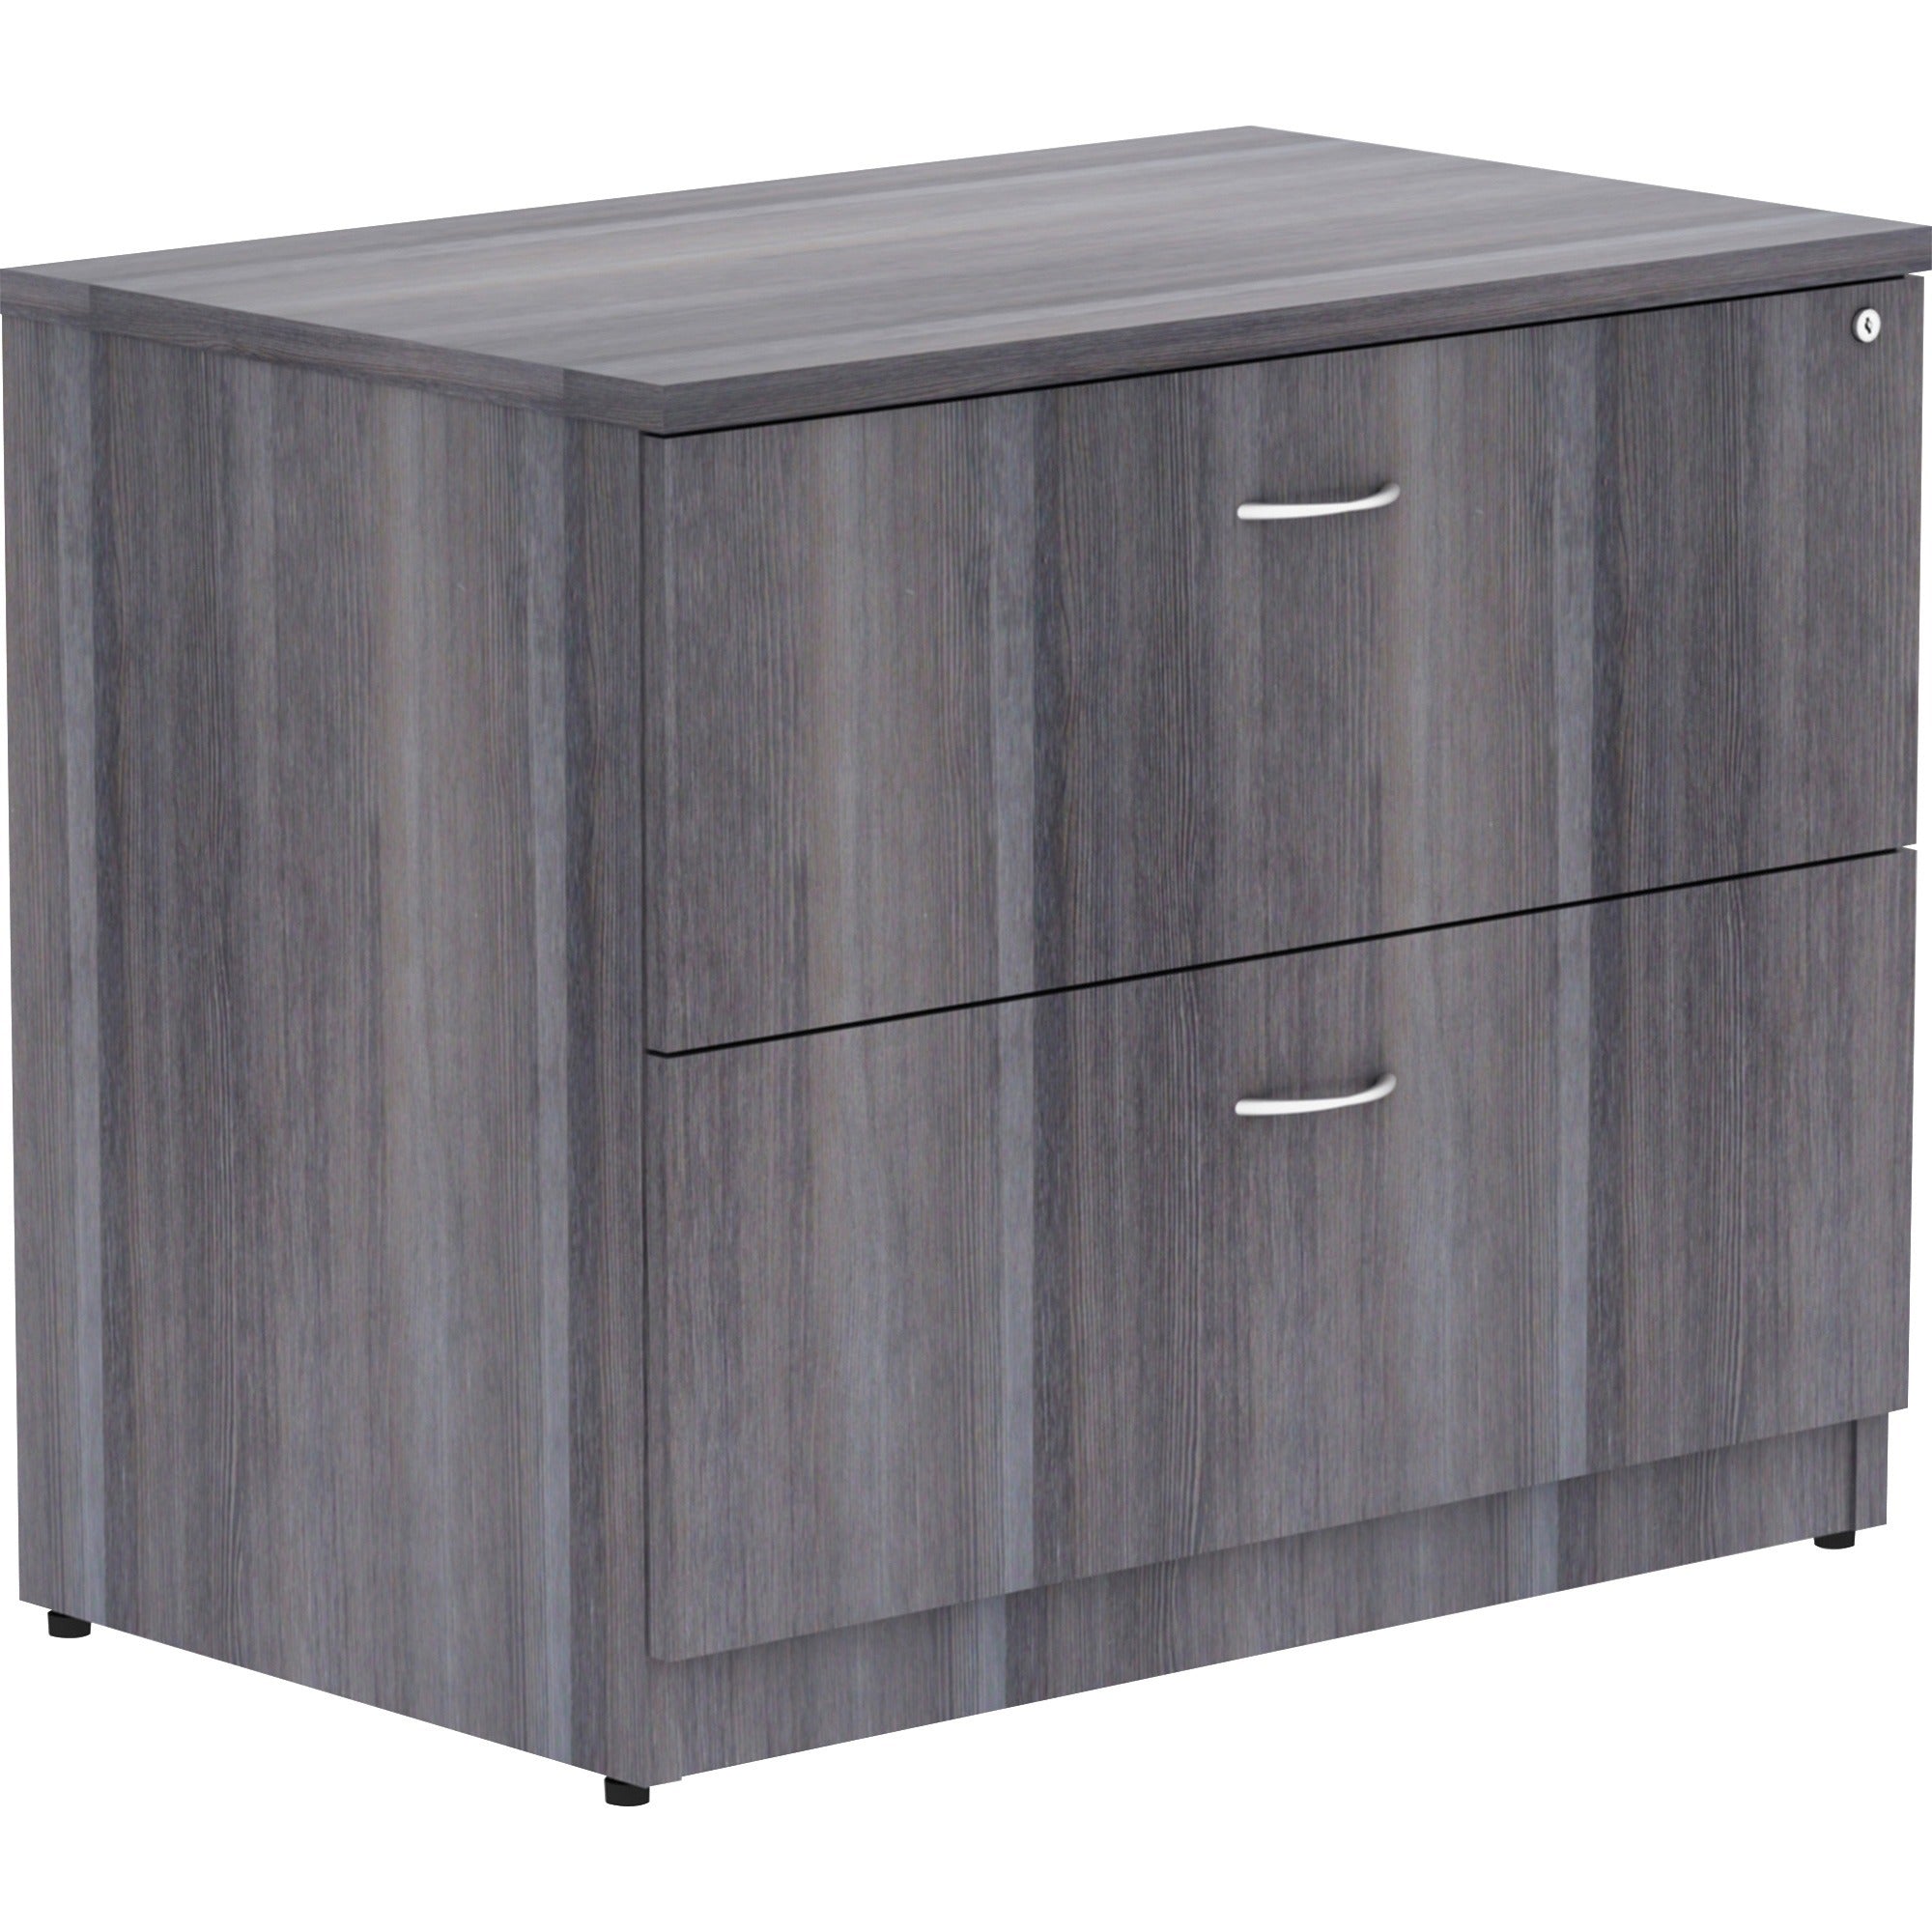 lorell-essentials-series-lateral-file-35-x-22295--1-top-2-x-file-drawers-finish-weathered-charcoal-laminate_llr69563 - 1